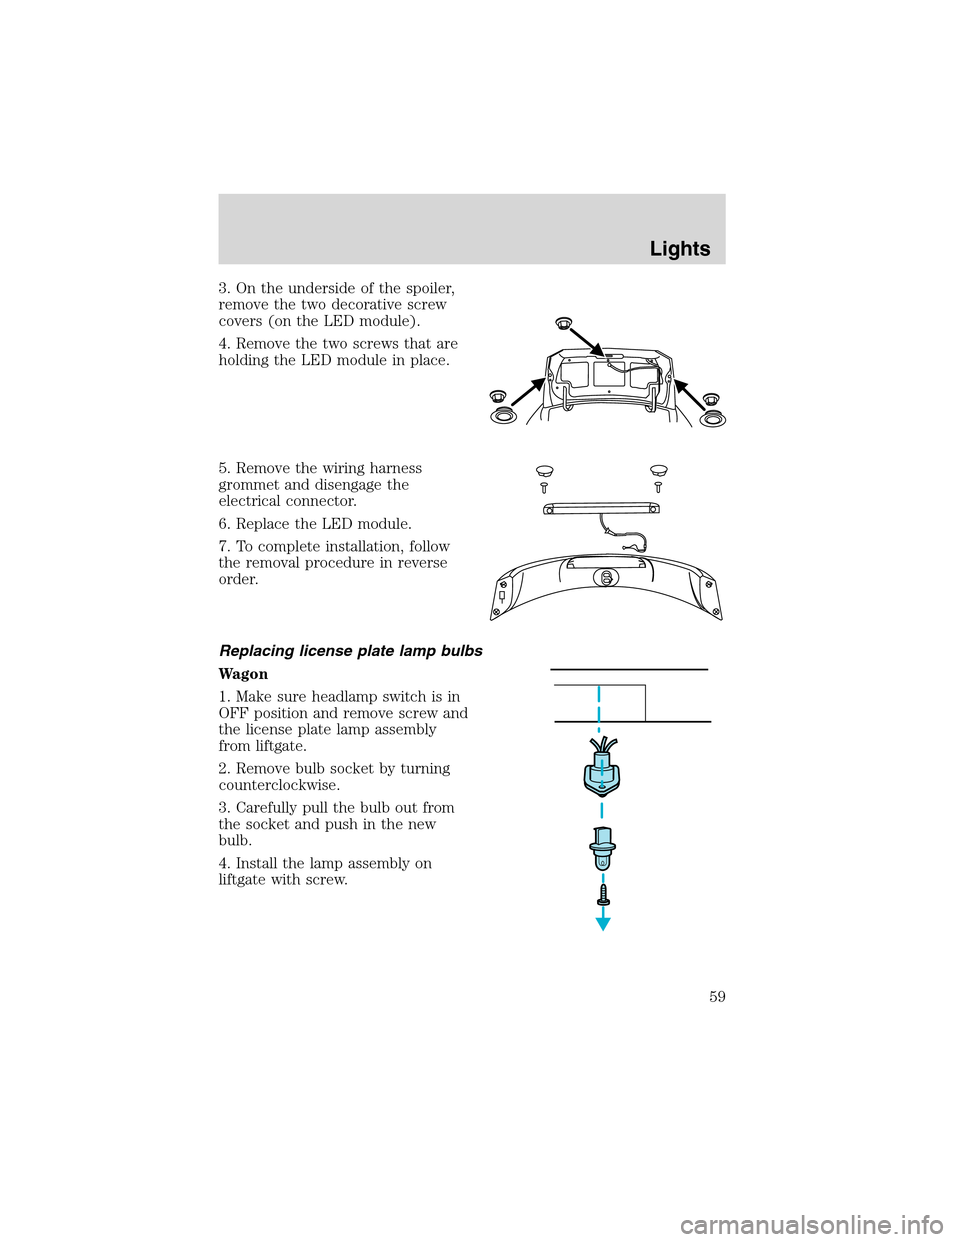 Mercury Sable 2002  s User Guide 3. On the underside of the spoiler,
remove the two decorative screw
covers (on the LED module).
4. Remove the two screws that are
holding the LED module in place.
5. Remove the wiring harness
grommet 